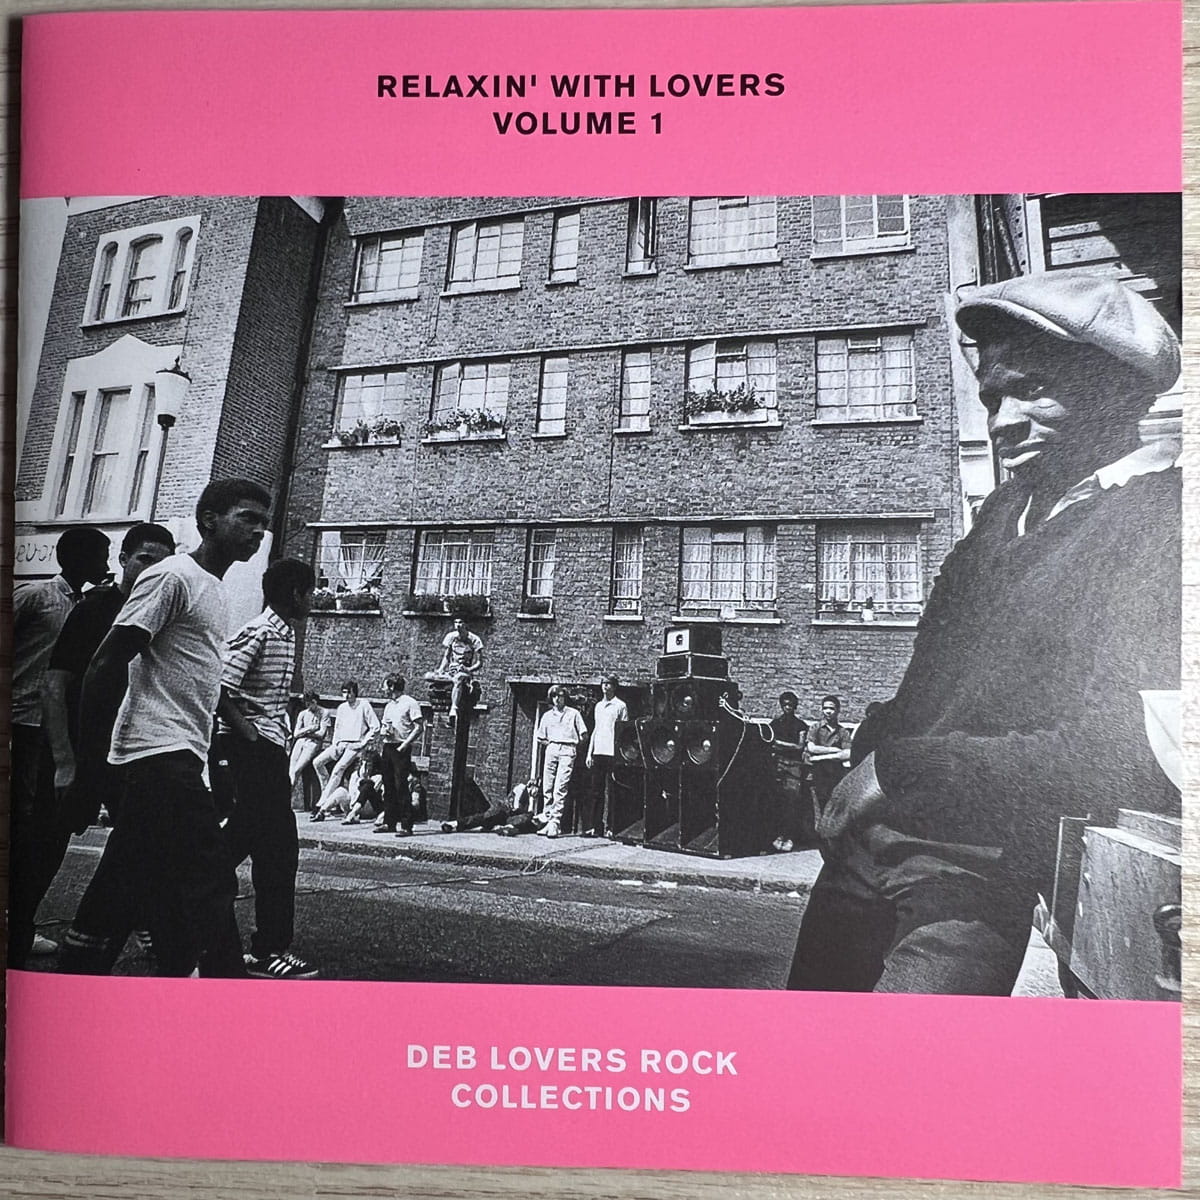 CD】V.A. / RELAXIN' WITH LOVERS VOL.1 – YARDIES SHACK RECORDS